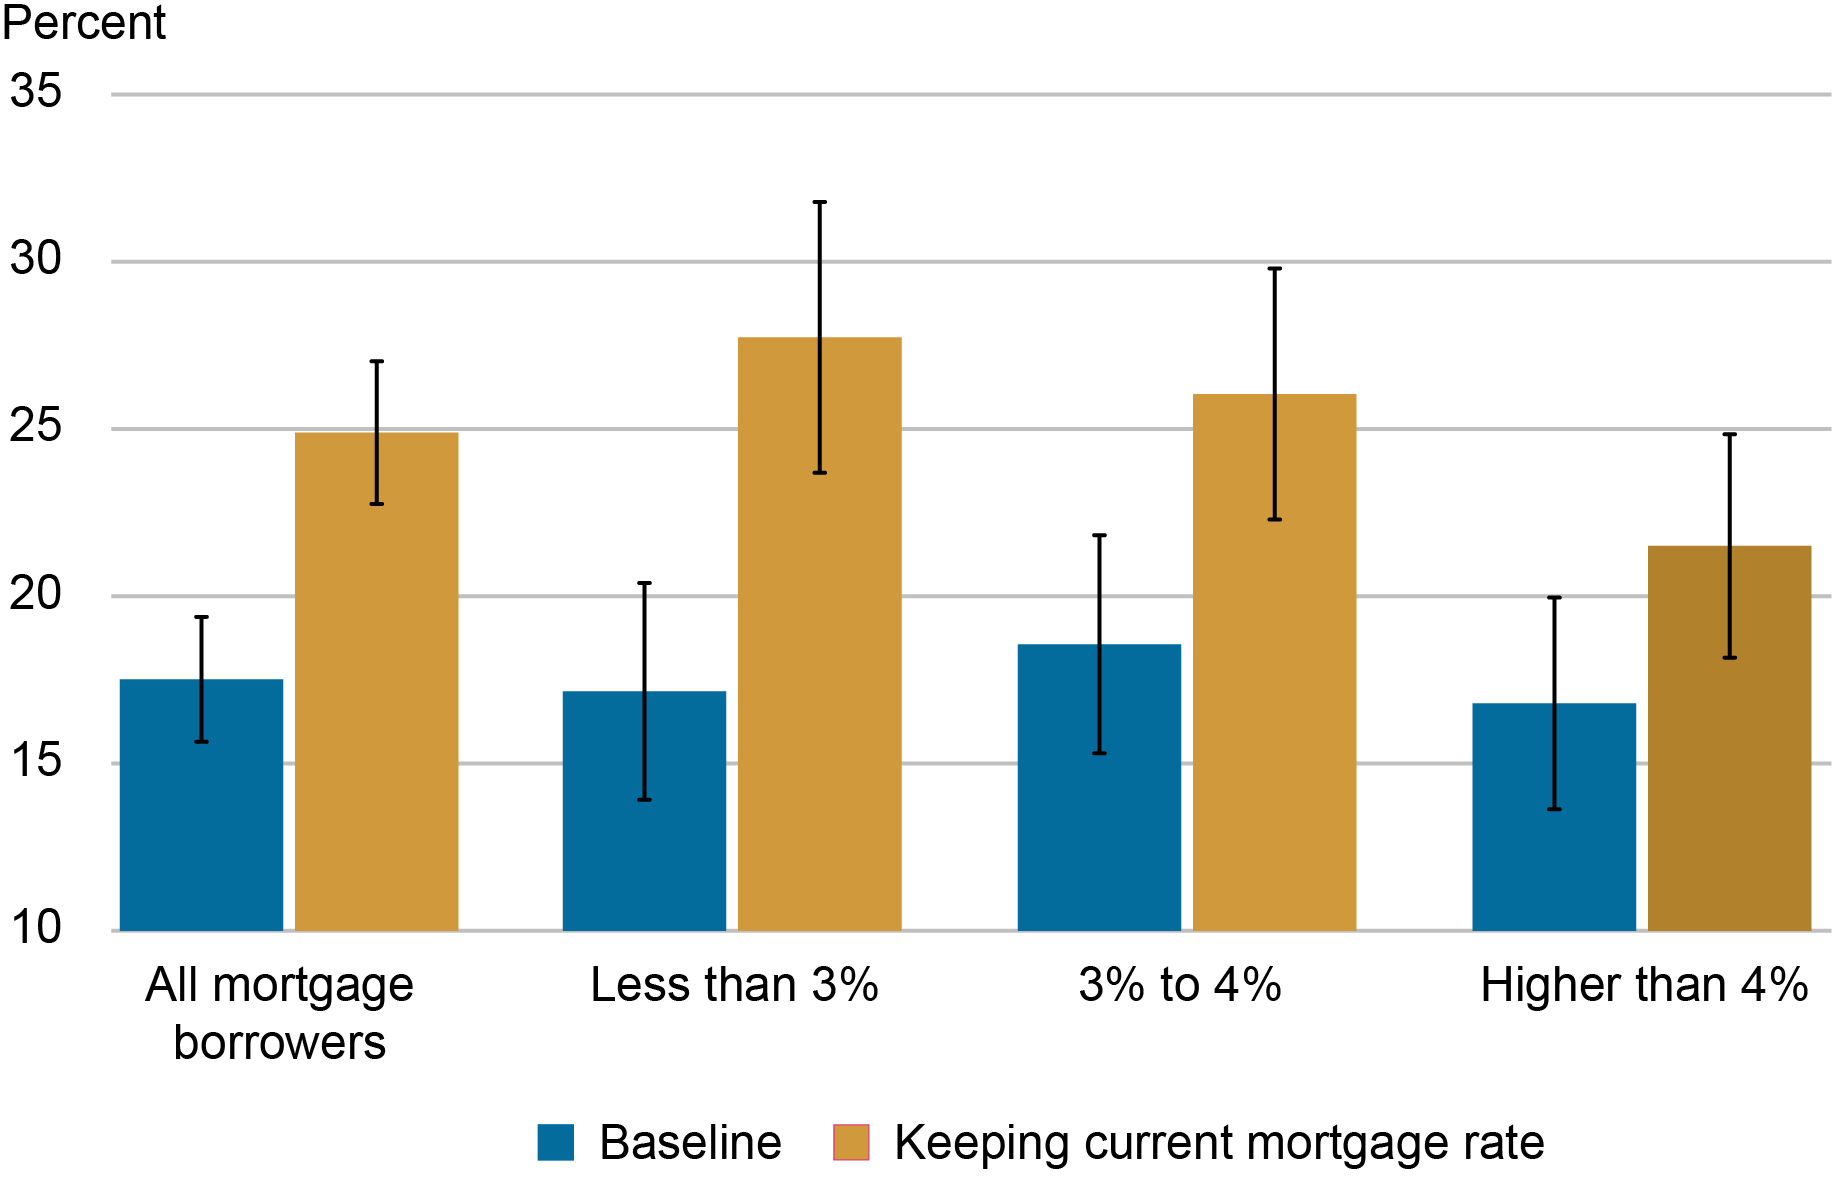 bar chart tracking average probably of moving in next three years for baseline respondents (blue) and those who were offered to keep their current mortgage rate (gold) for (left to right) all mortgage borrowers, less than 3% interest rate, 3% to 4% interest rate, and higher than 4% interest rate.